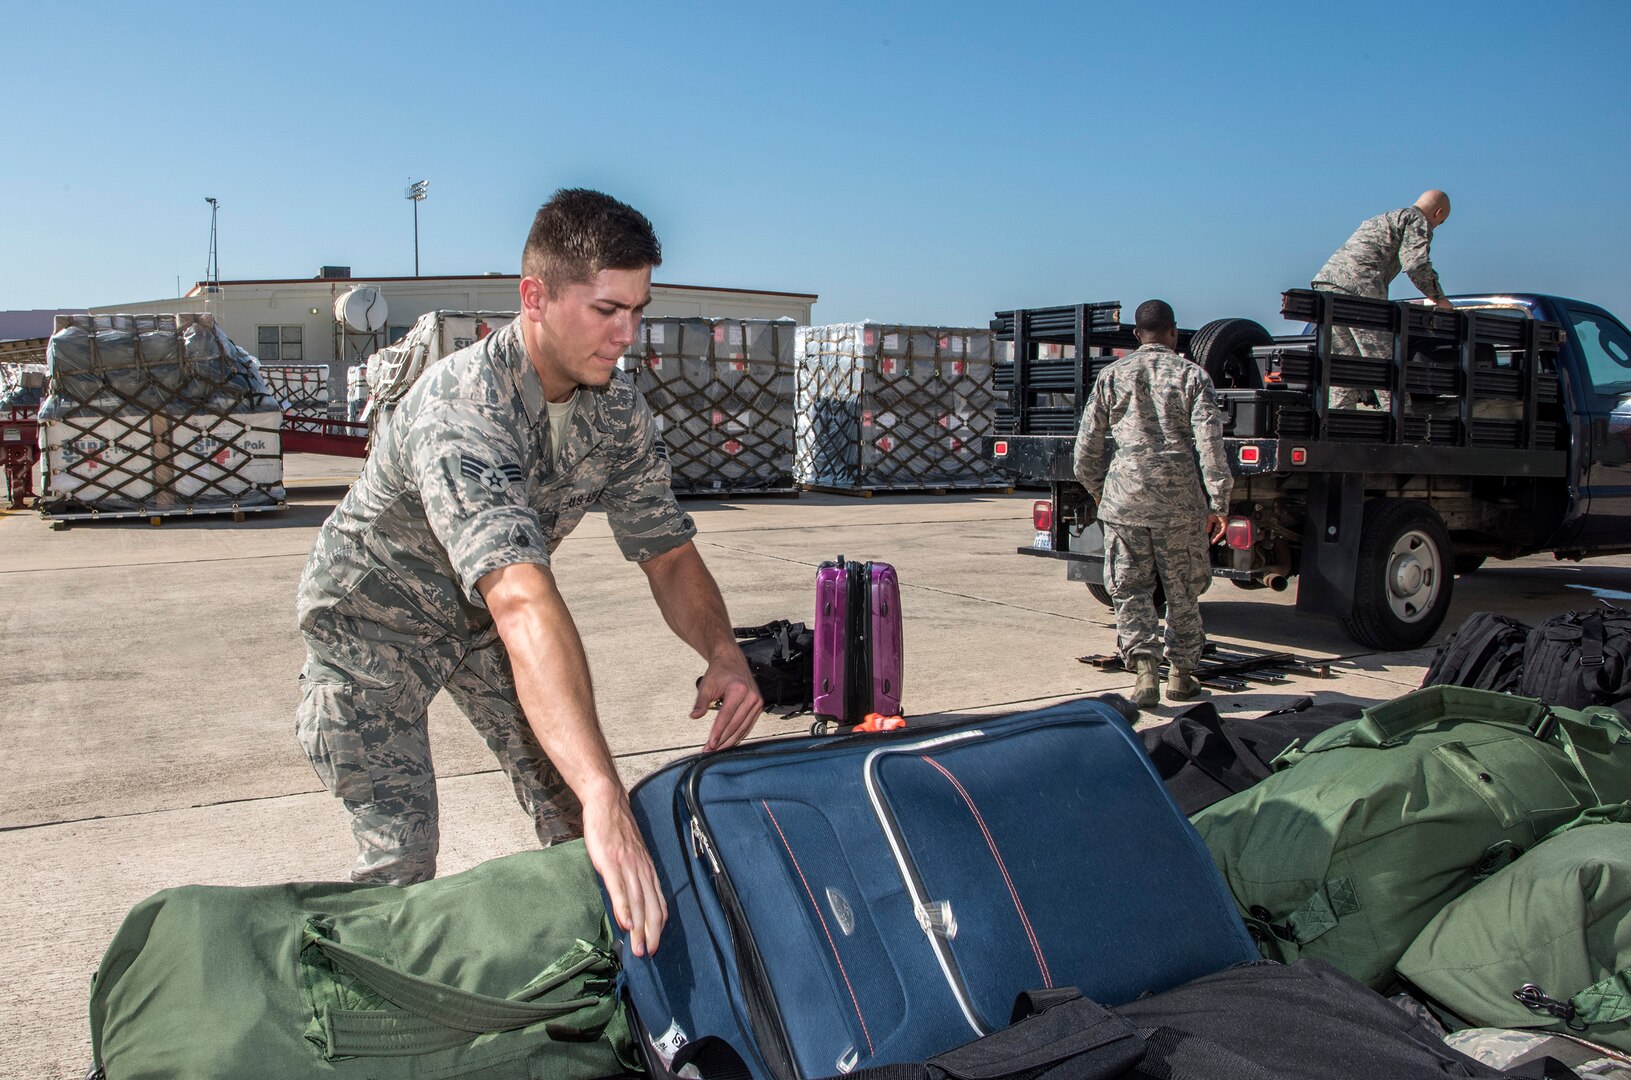 Airmen from the 59th Medical Wing prepare deployment bags for transport Aug. 30, 2017 at Joint Base San Antonio-Lackland, Texas.